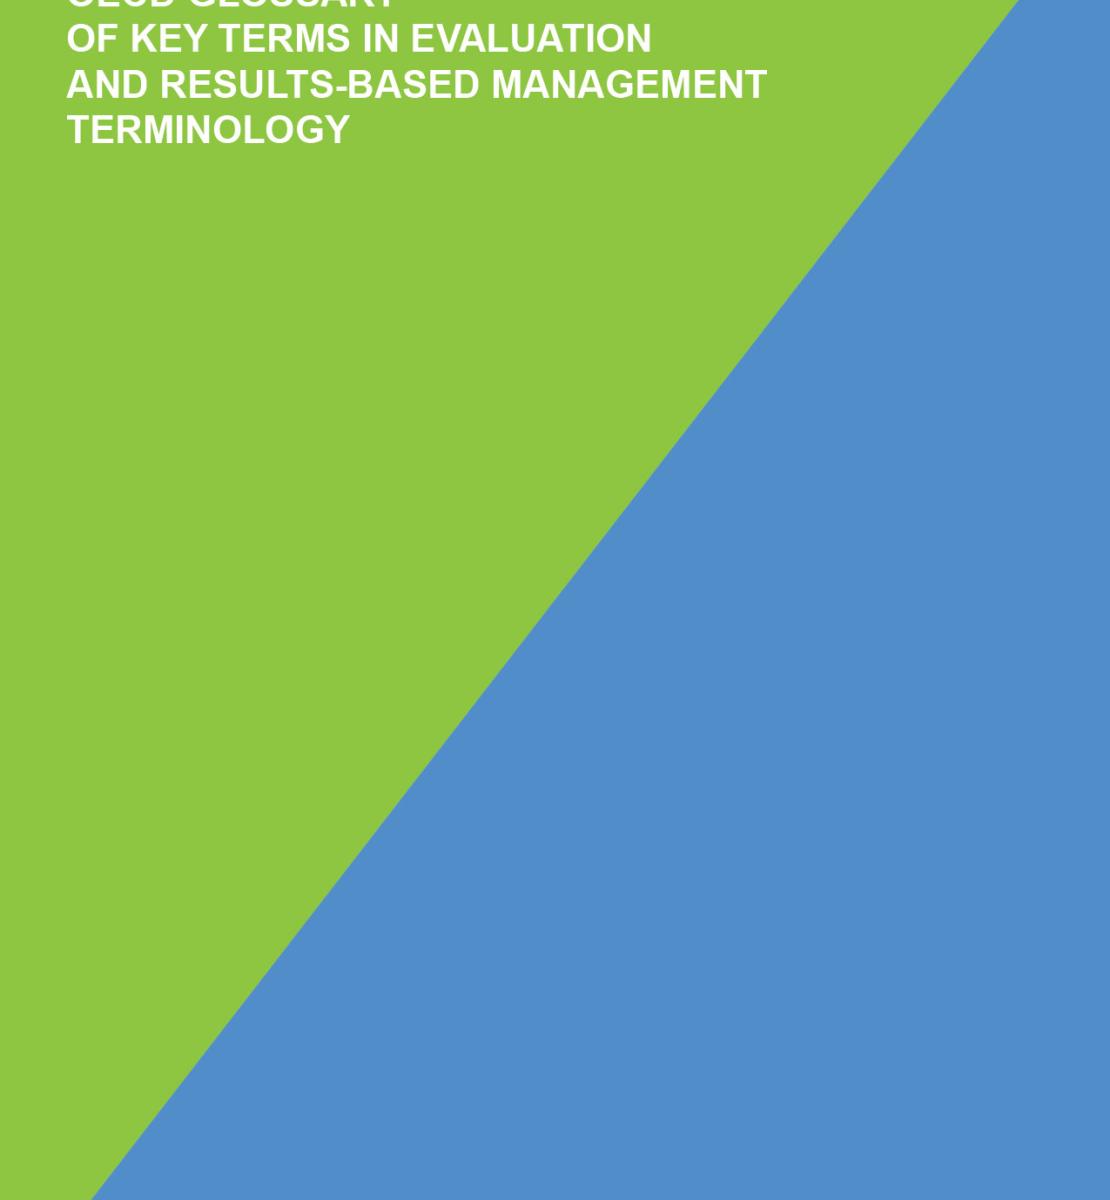 OECD Glossary of Key Terms in Evaluation and Results-based Management Terminology